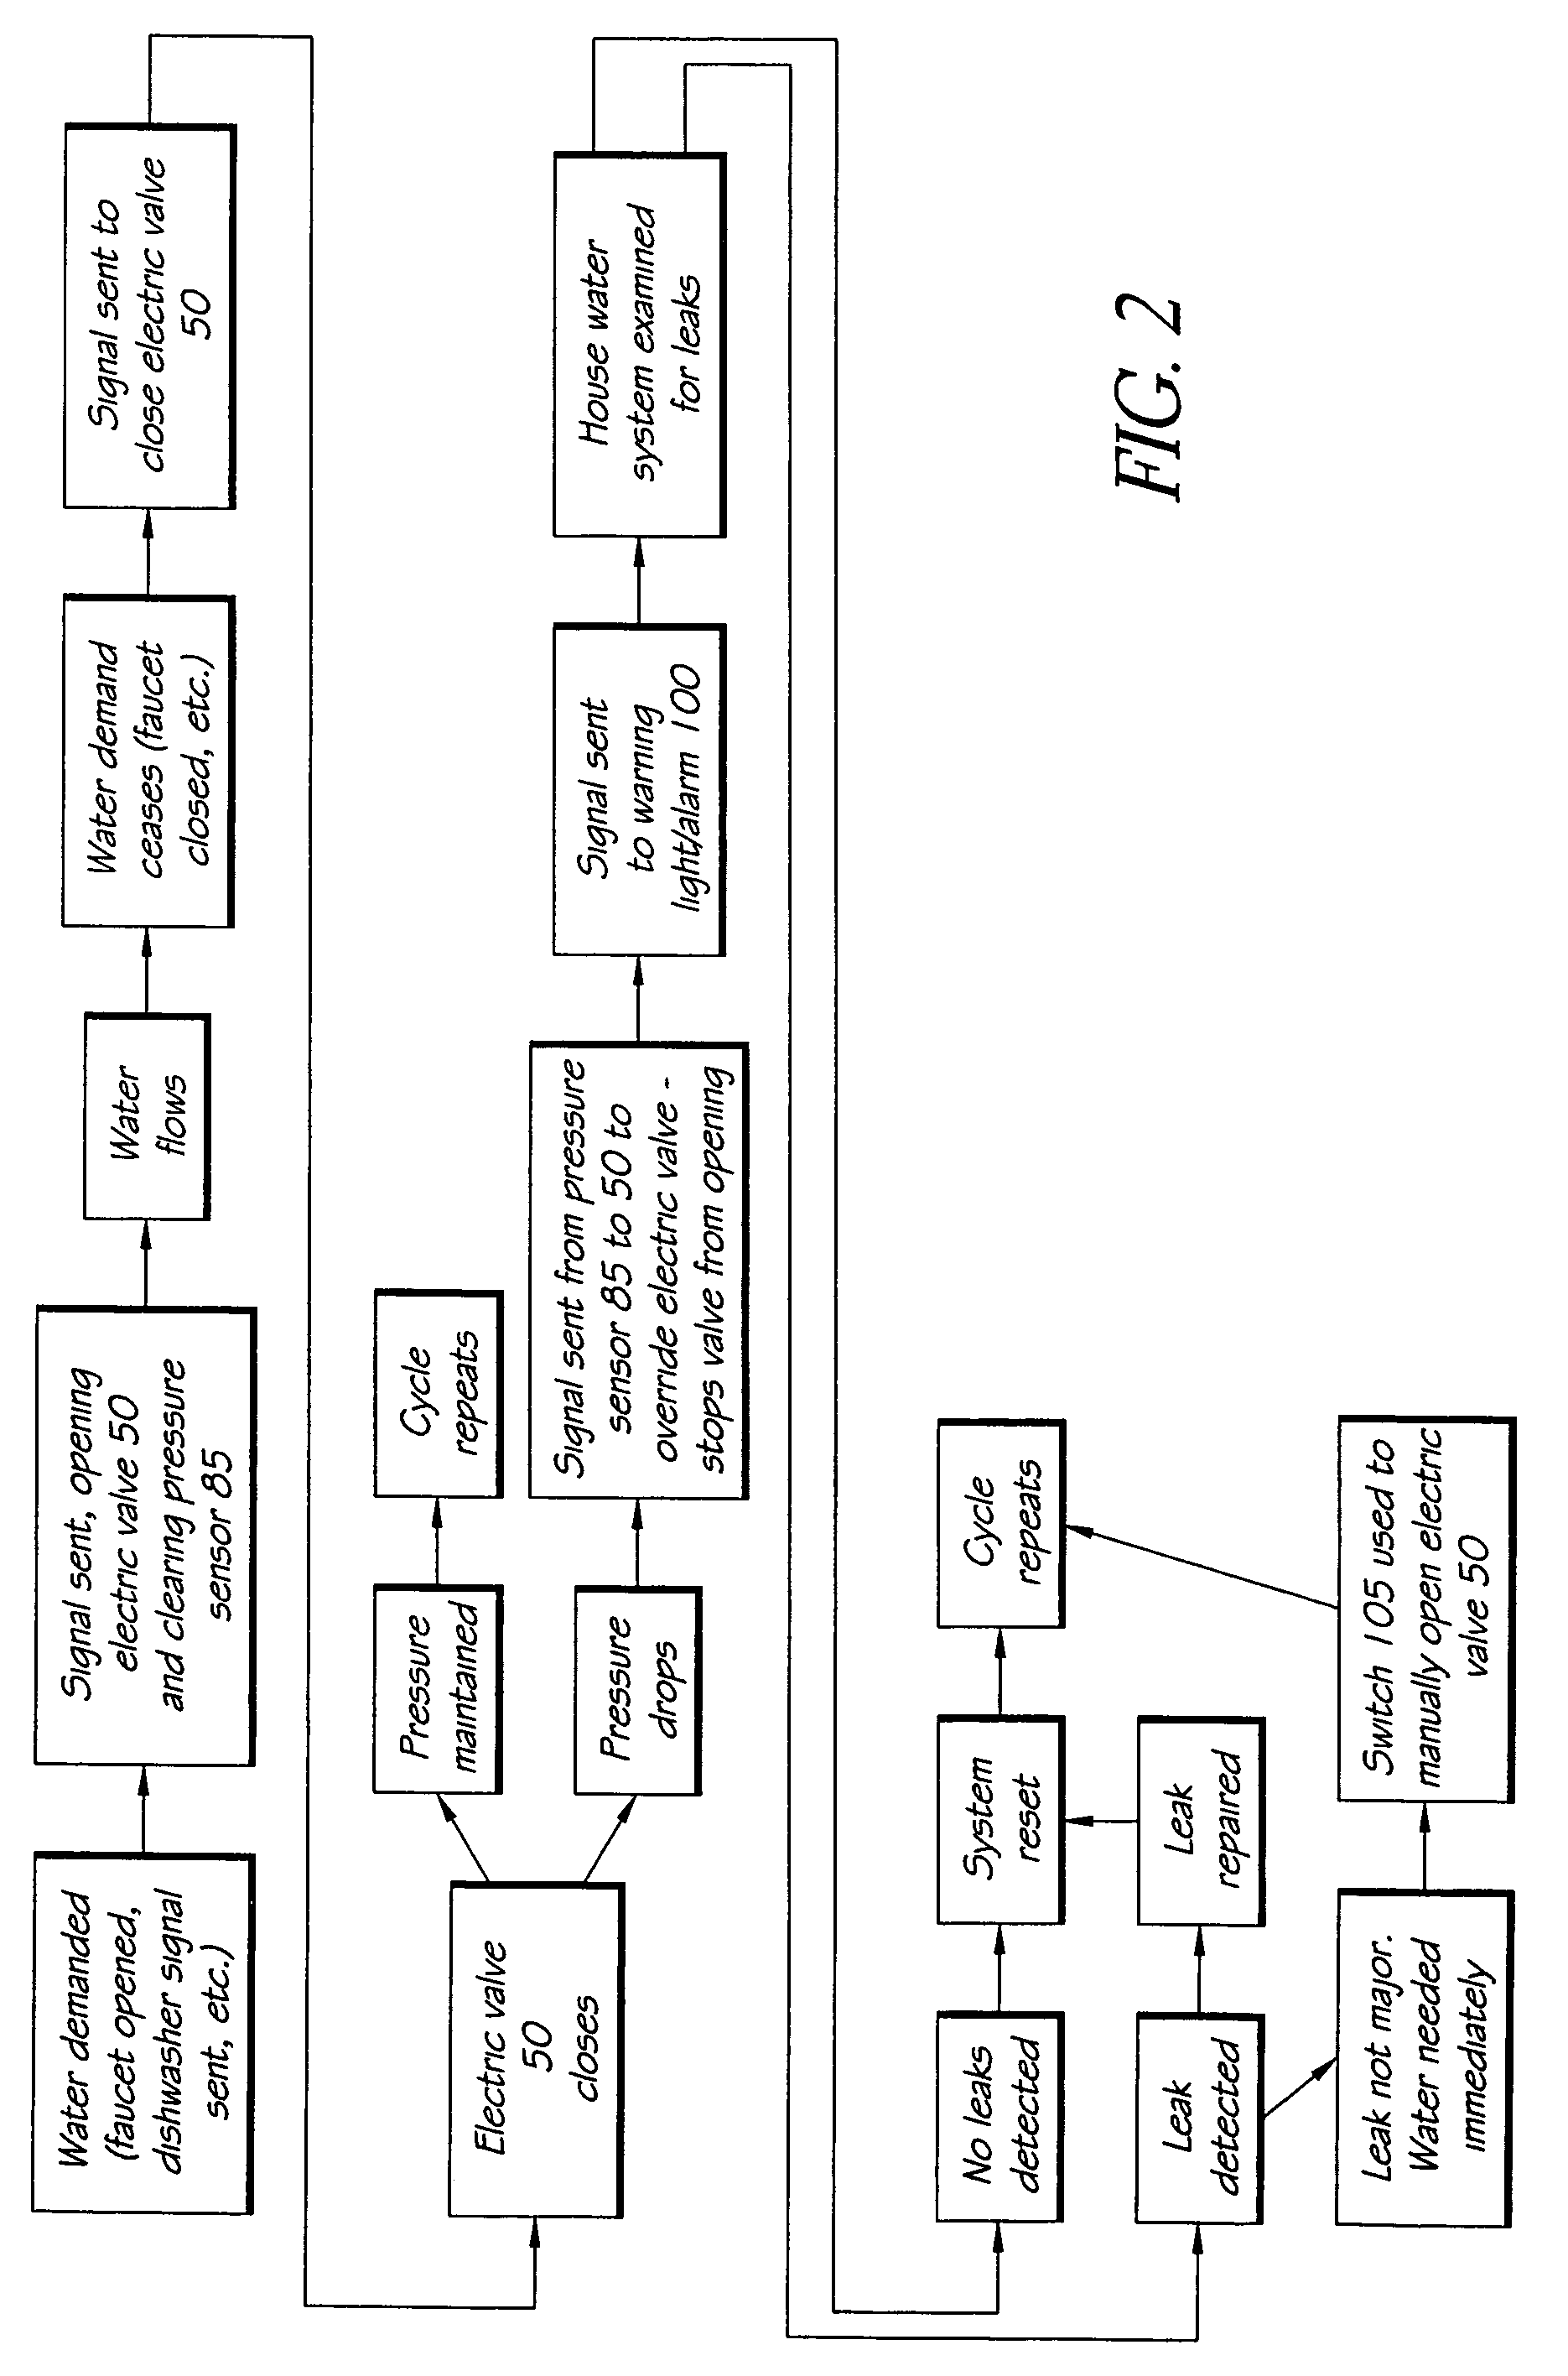 Water leak detection and prevention systems and methods